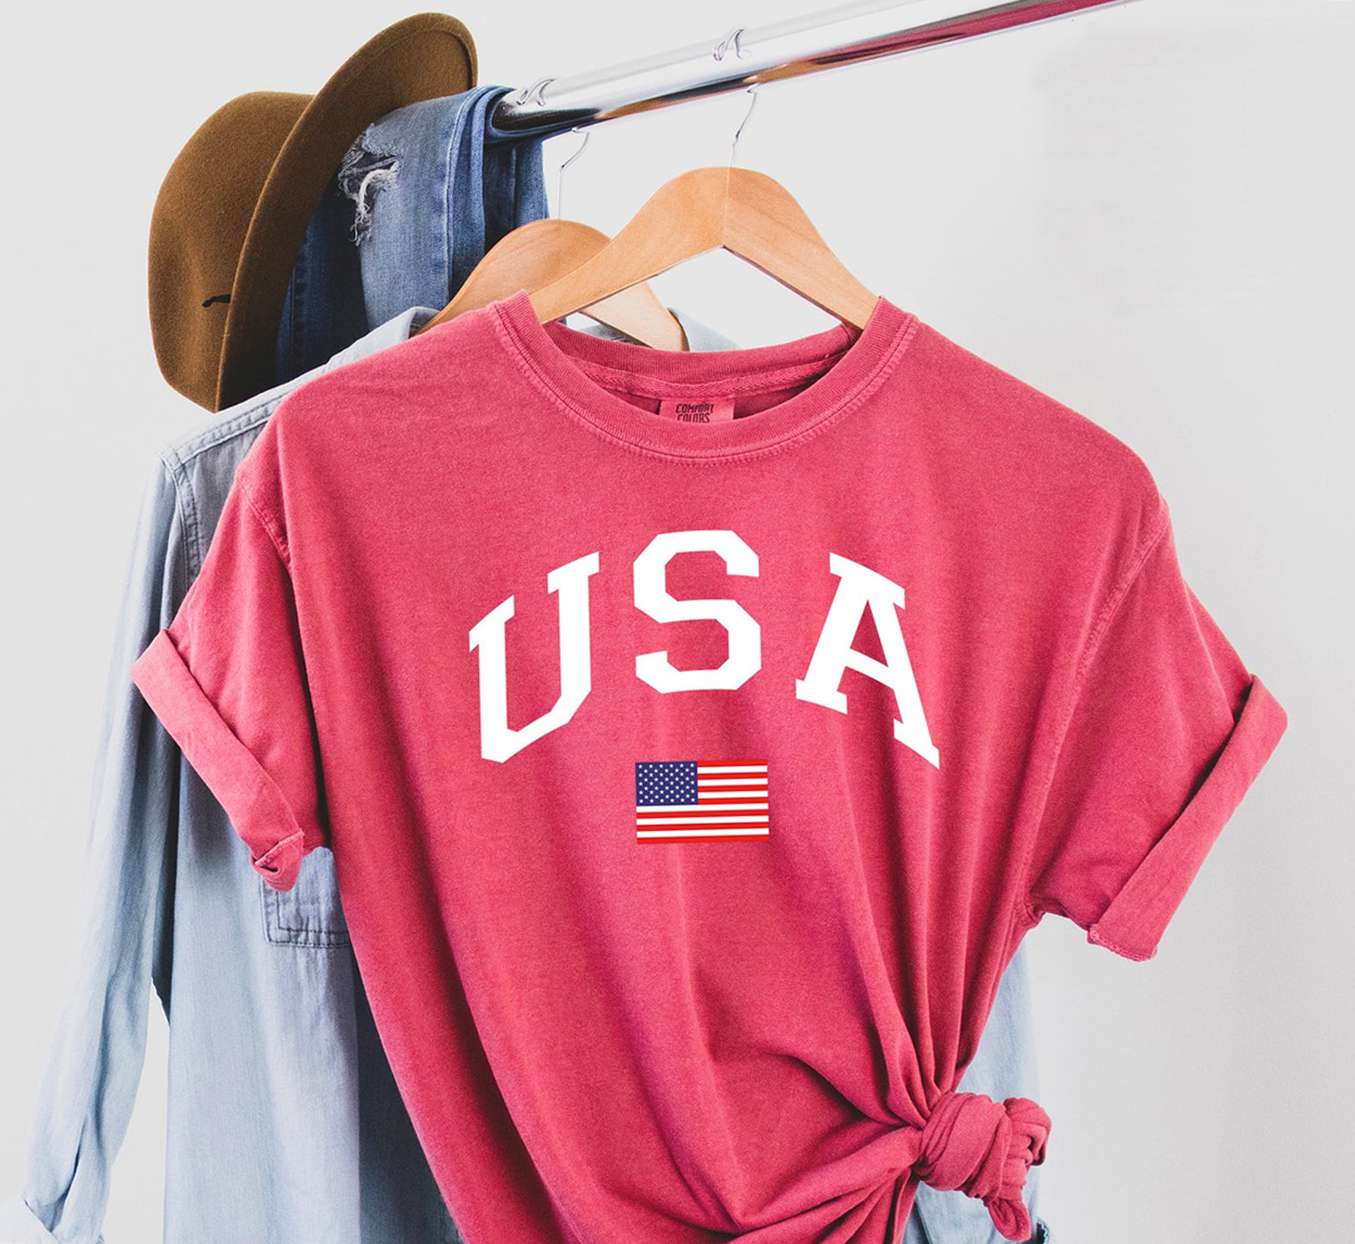 Red White & Boozy T-shirt Patriotic T-shirt 4th Of July Shirt Independence Day Shirts Fourth Of July T-shirts